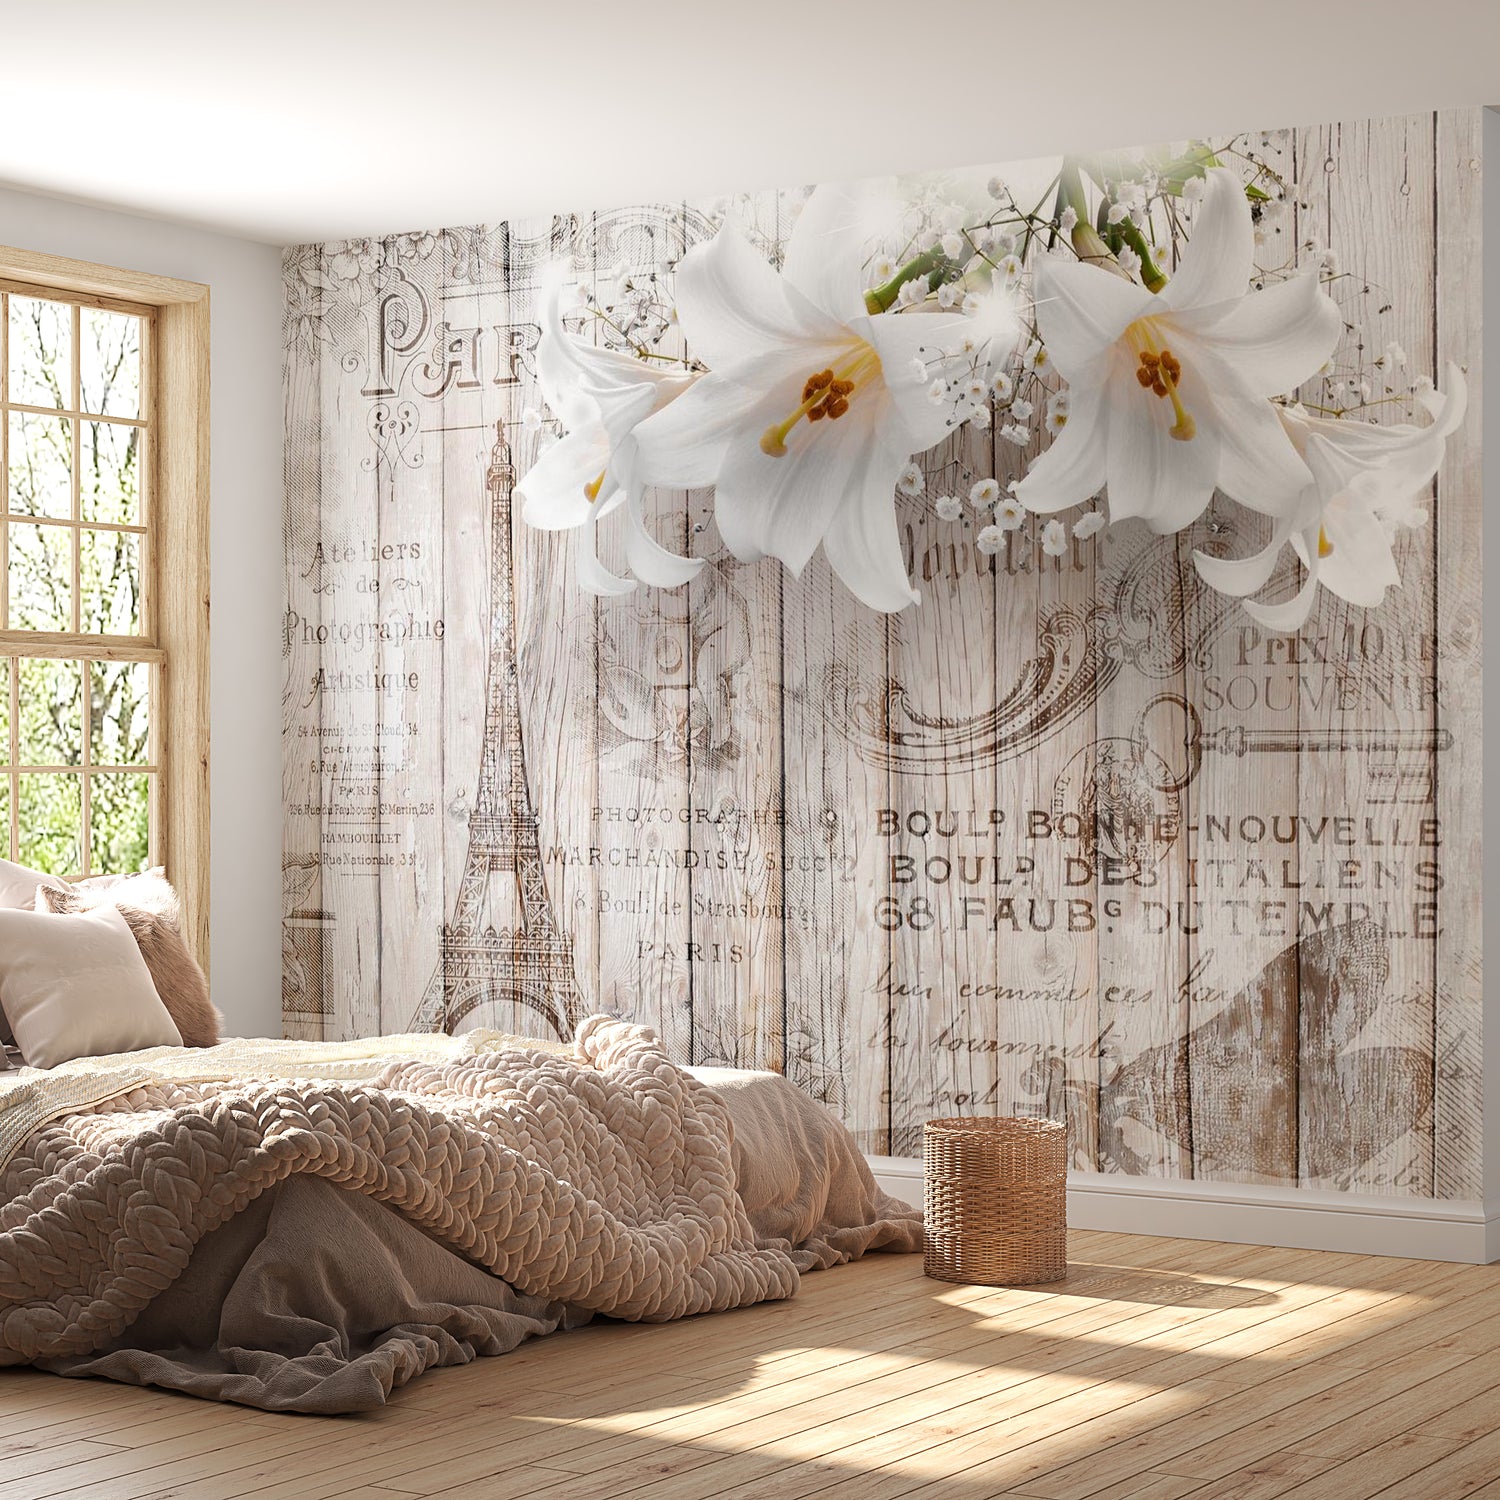 Peel & Stick Floral Wall Mural - Parisian Lilies - Removable Wall Decals